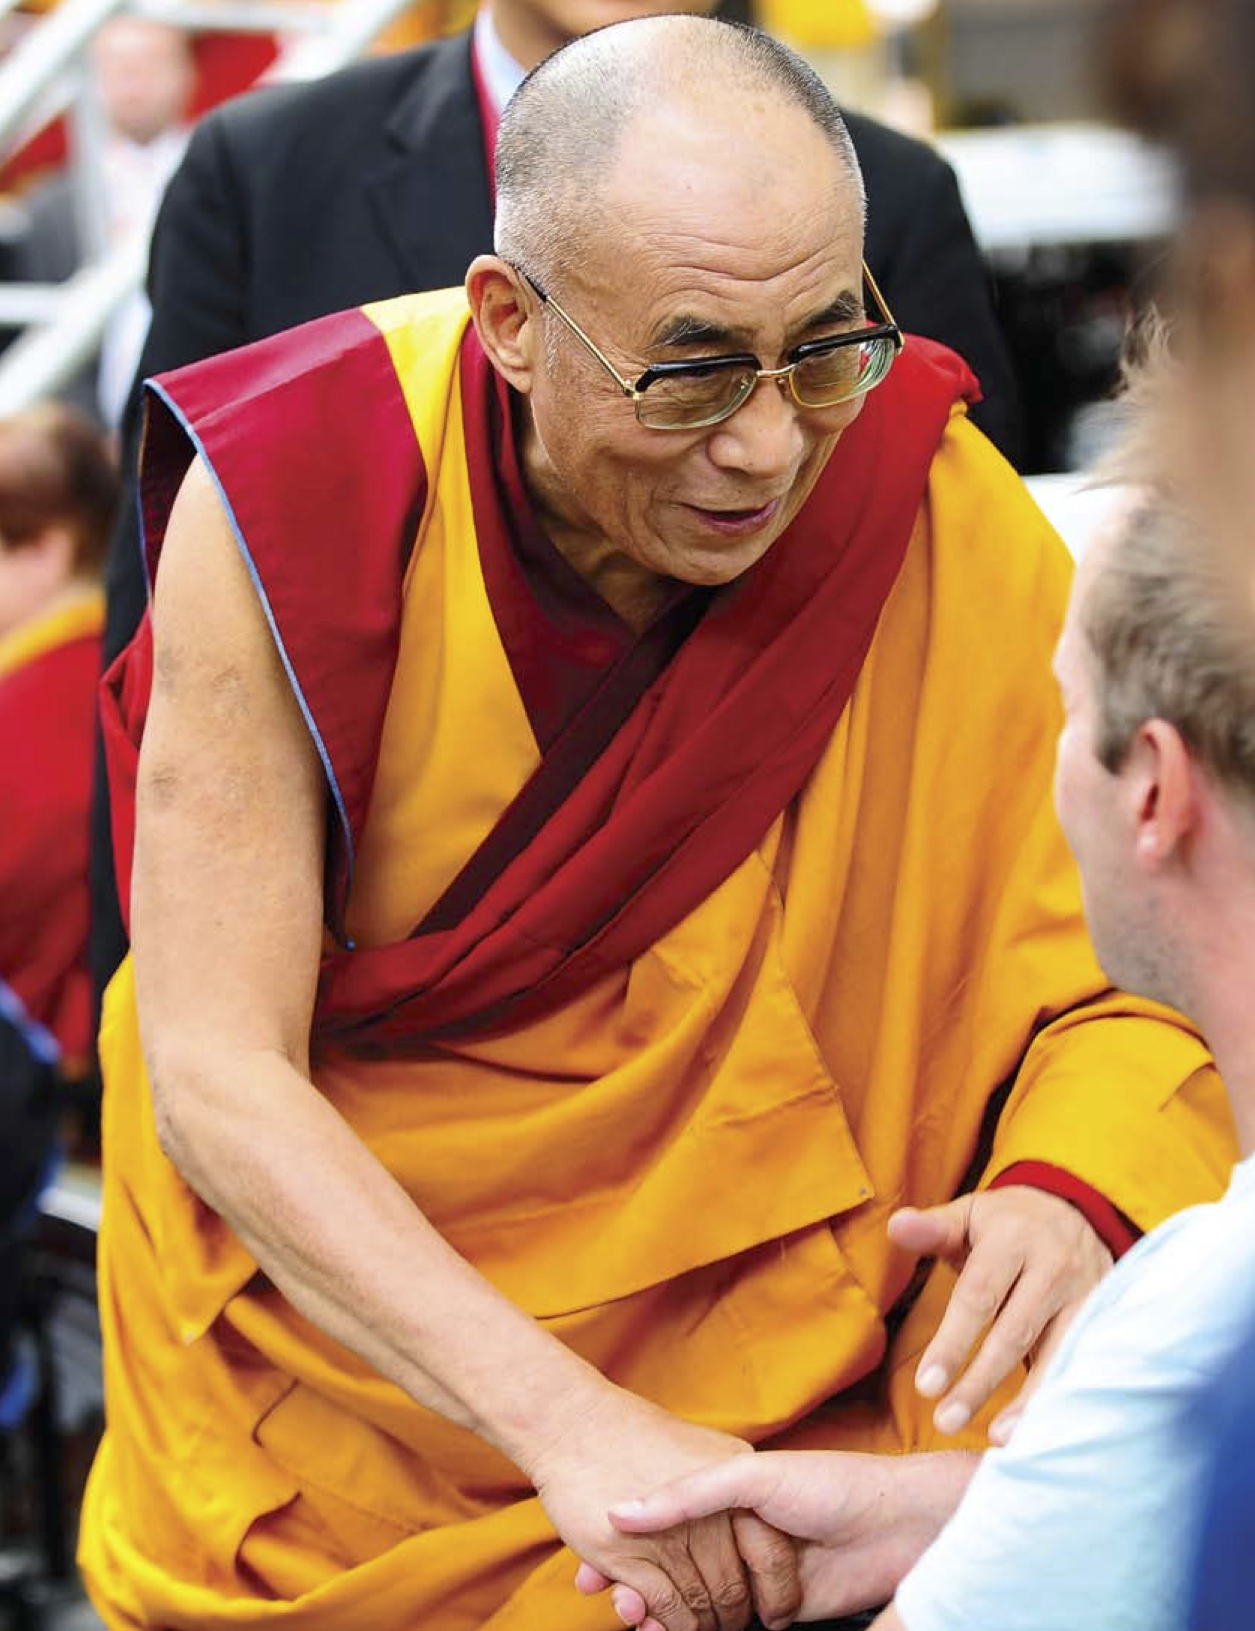 His Holiness the Dalai Lama: "Propitiating Dolgyal does great harm to the cause of Tibet...”